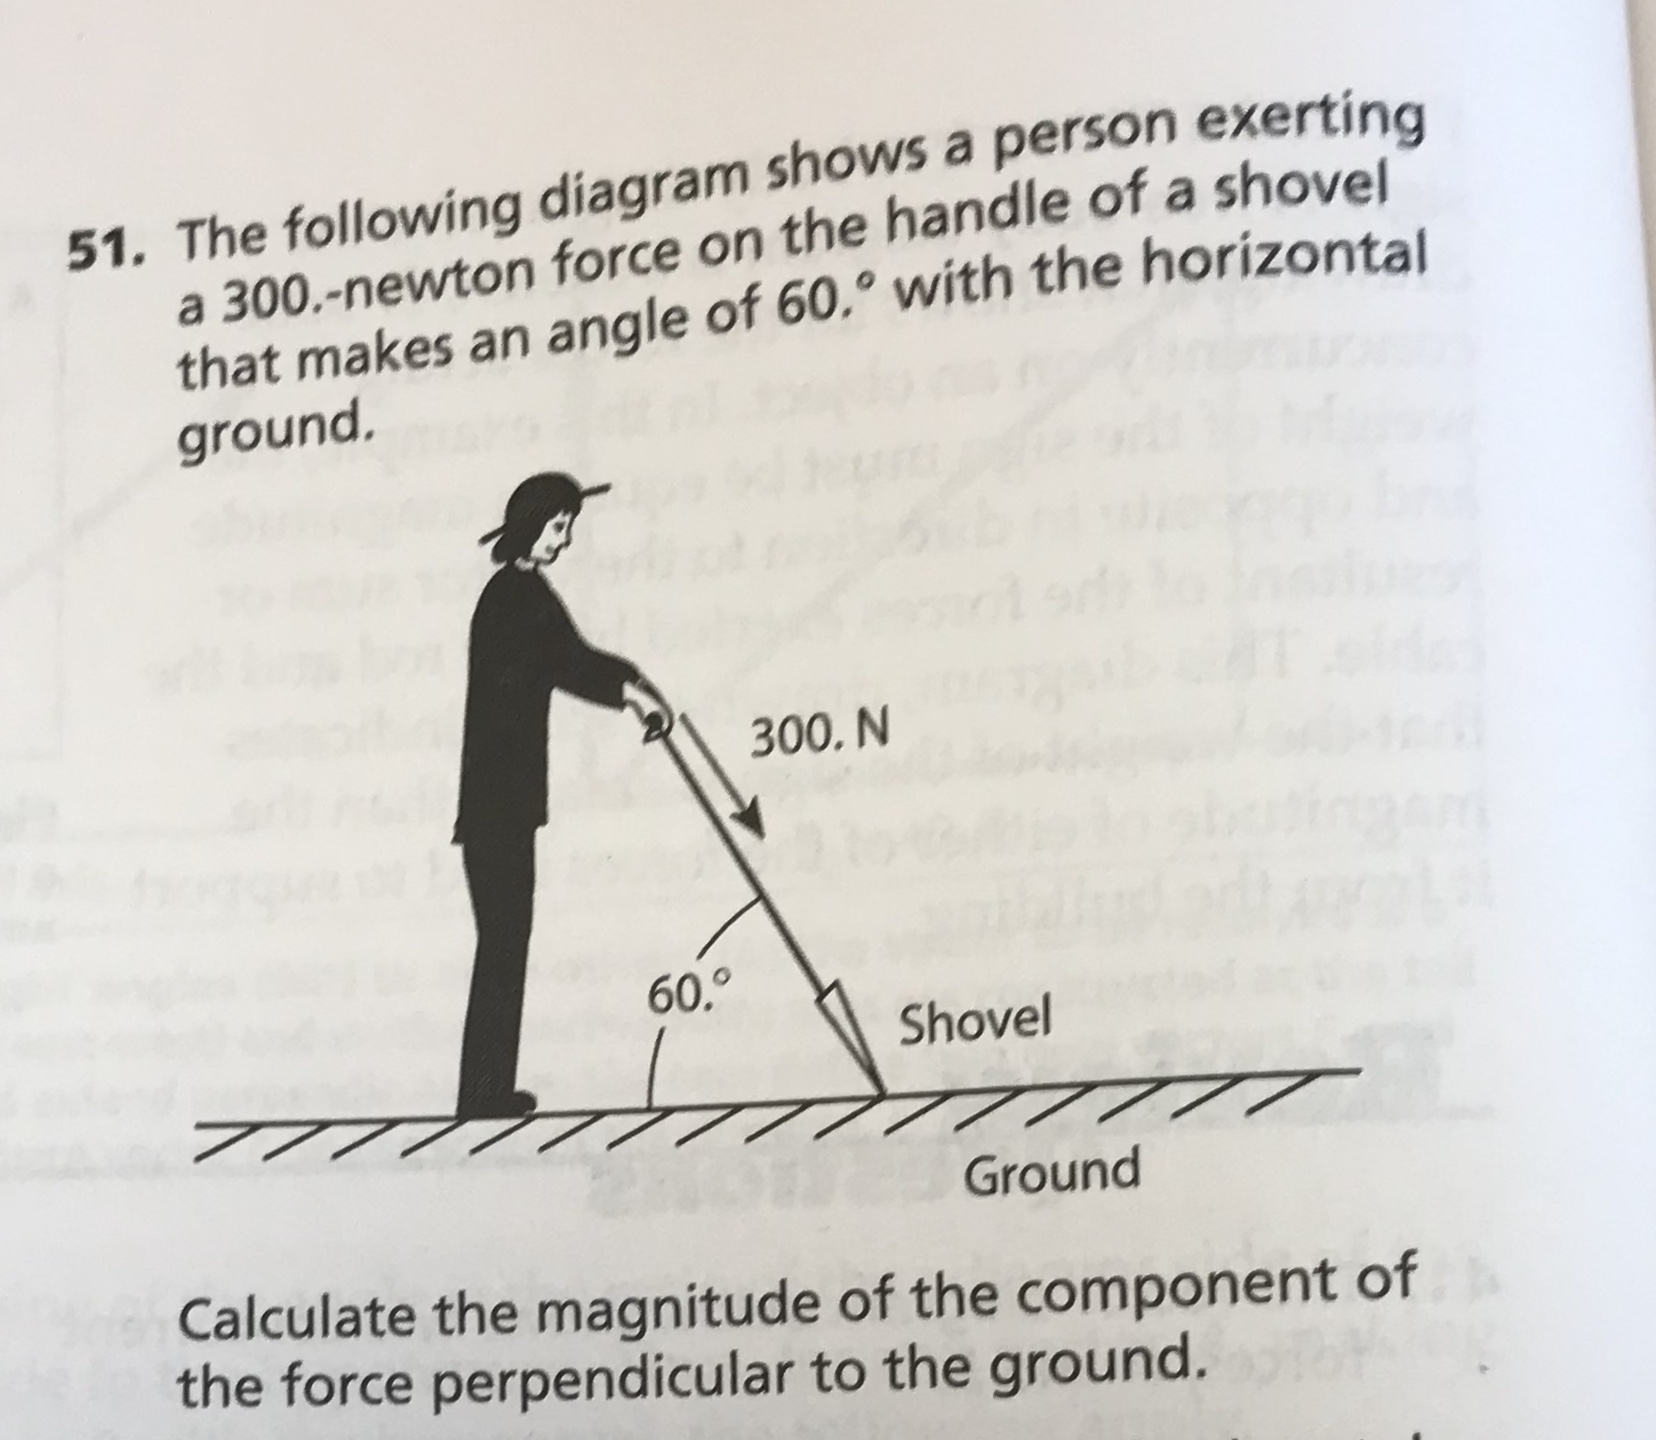 51. The following diagram shows a person exerting
a 300.-newton force on the handle of a shovel
that makes an angle of 60.° with the horizontal
ground.
300. N
60,0
Shovel
777
Ground
Calculate the magnitude of the component of
the force perpendicular to the ground.
